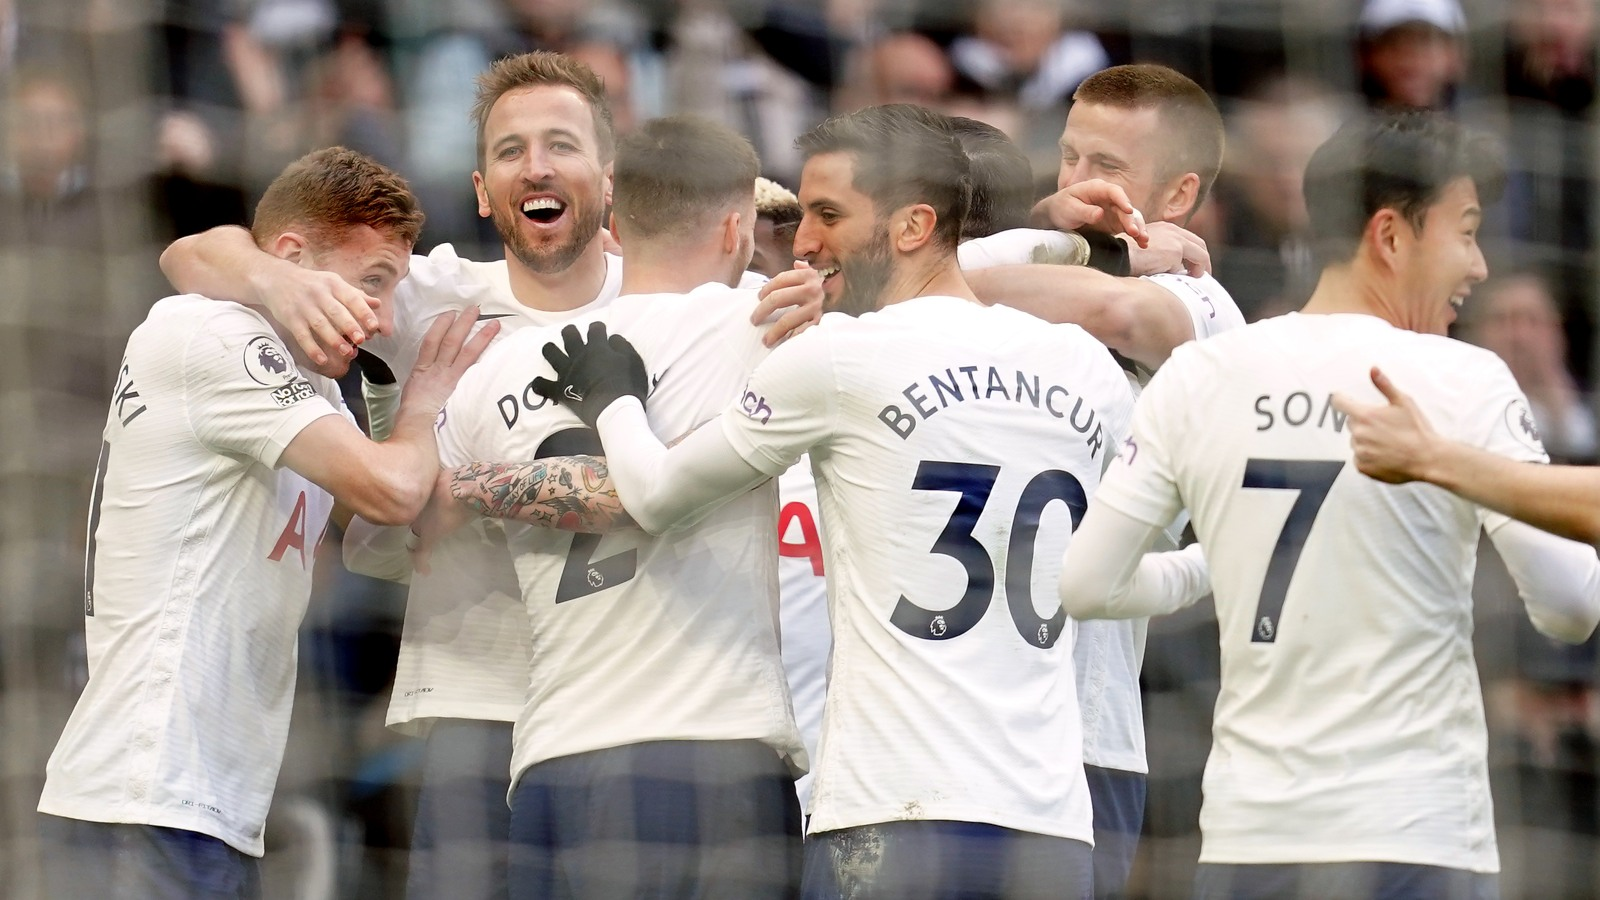 Tottenham Hotspur ventured into the top four with a 5-1 win over Newcastle United